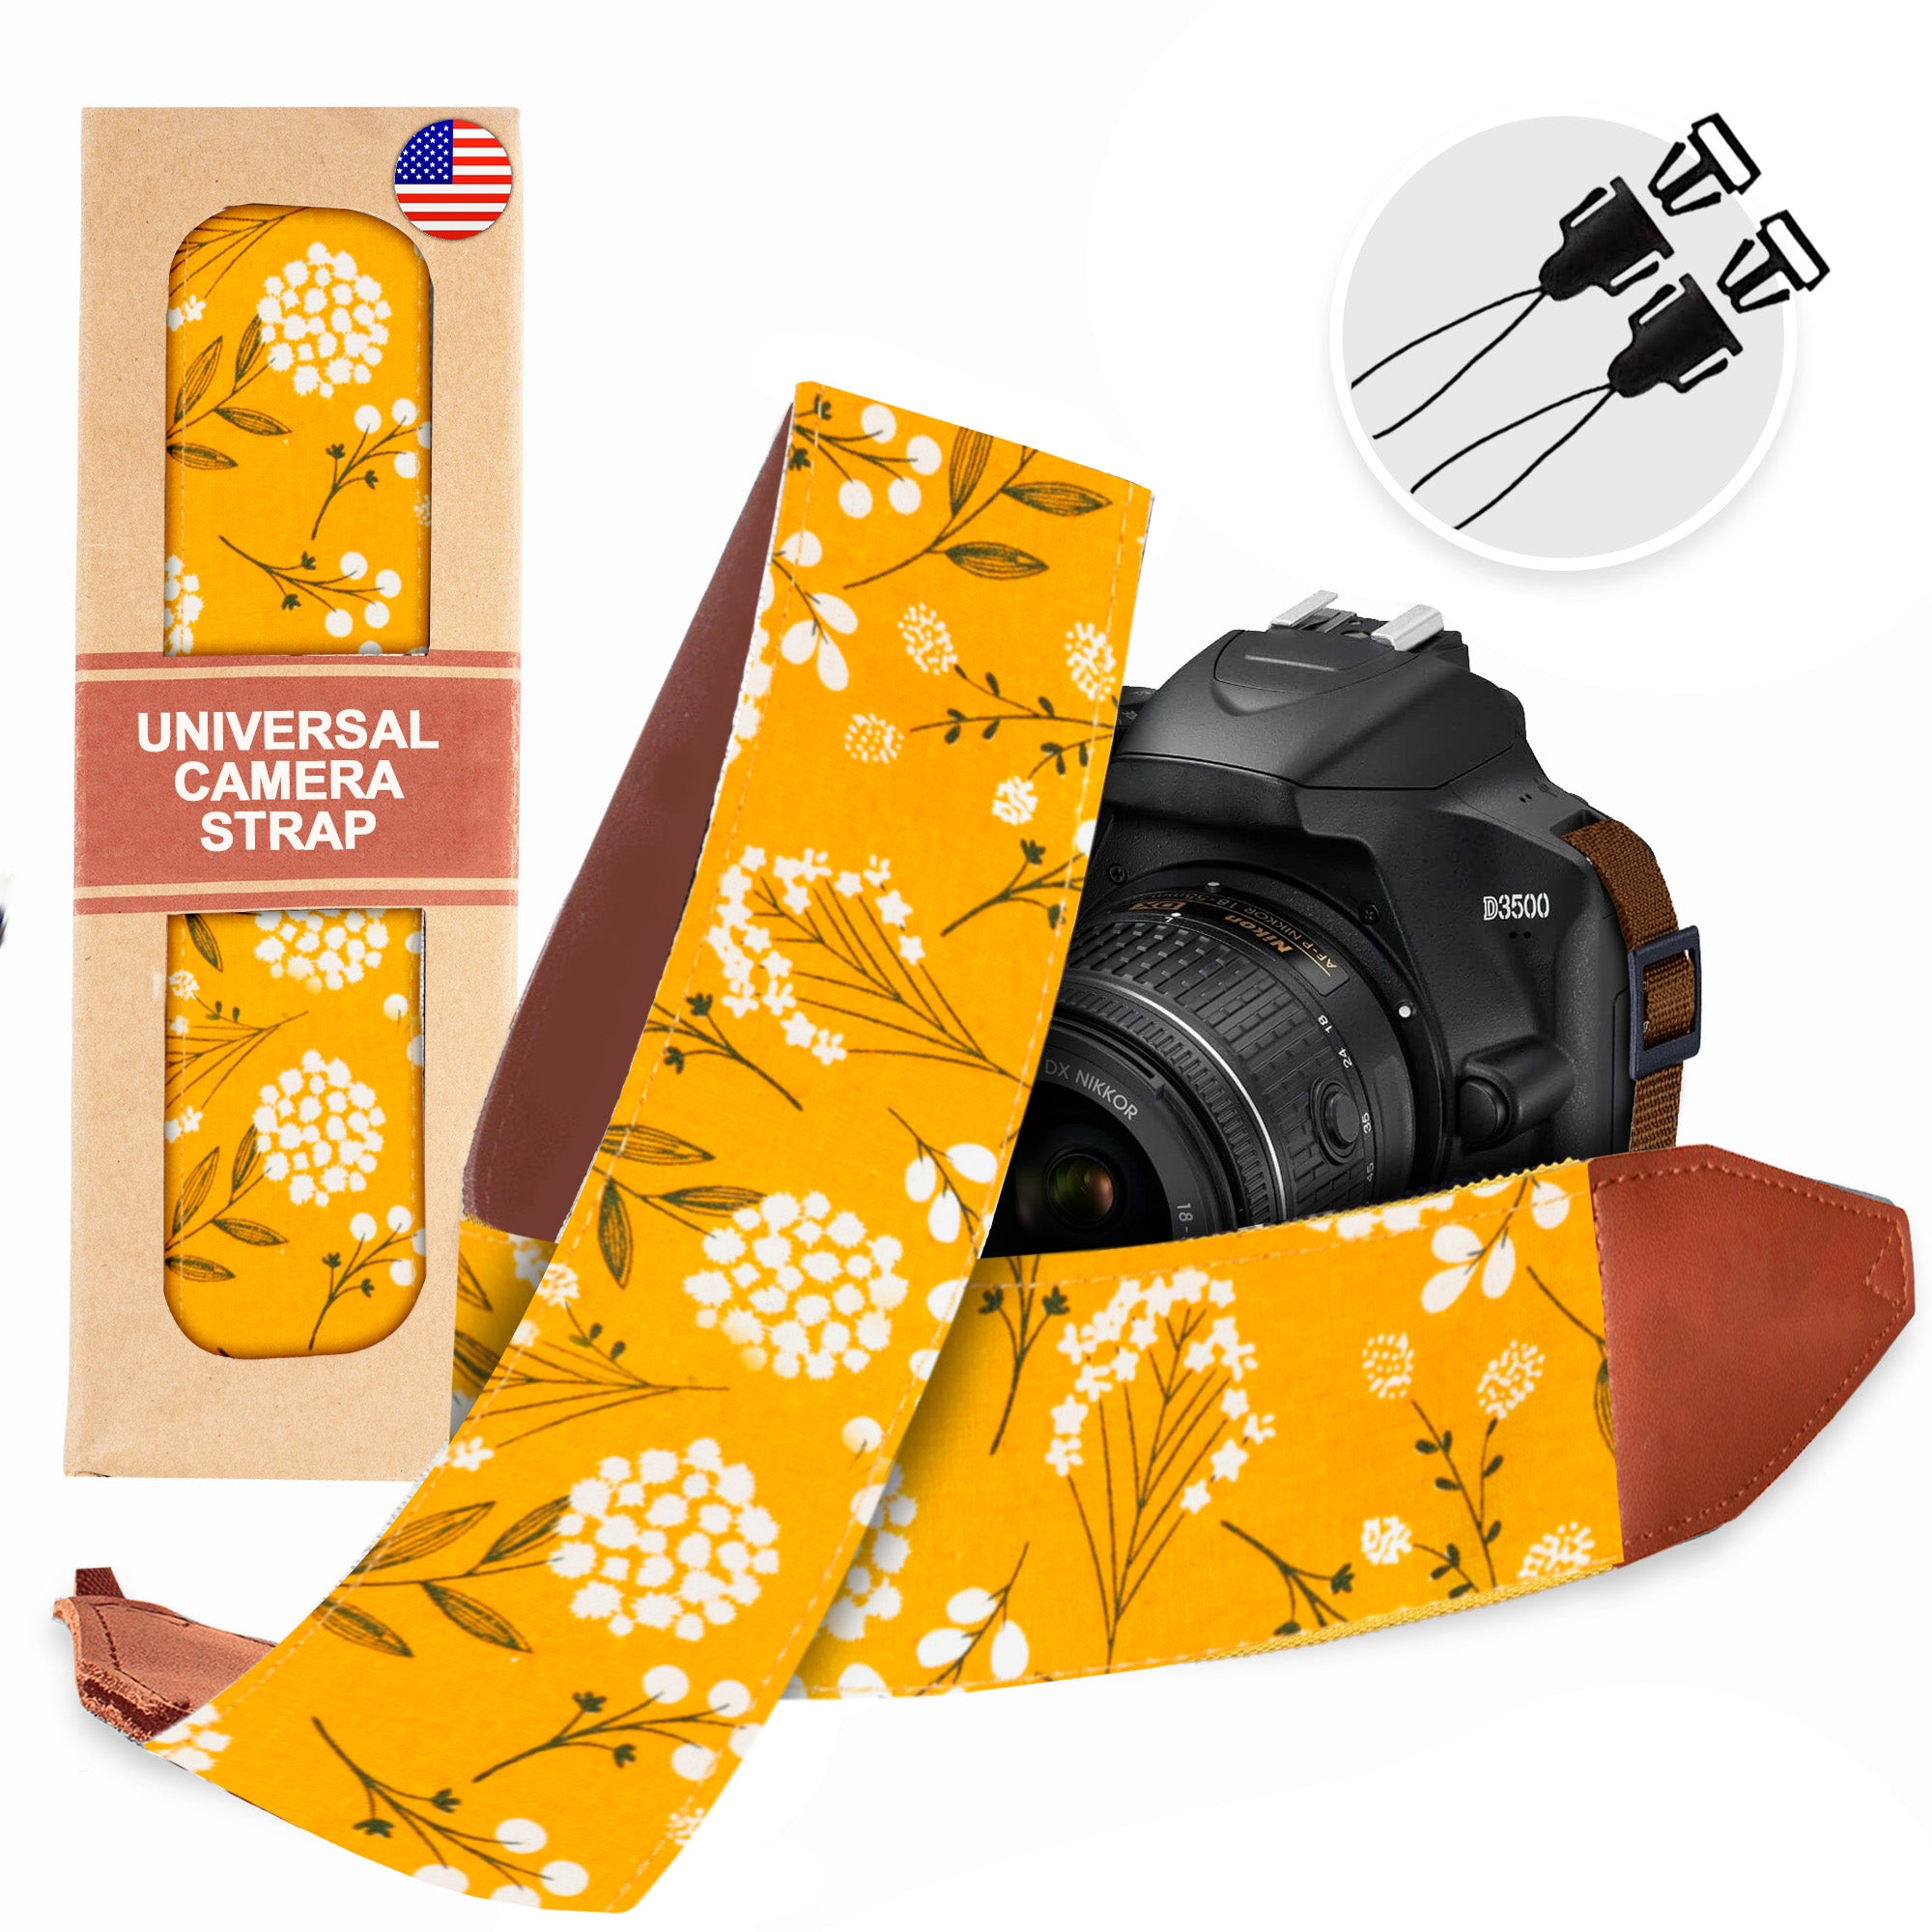 The DANDELION Camera Strap - Adjustable Camera strap for Nikon, Canon, Sony and all kinds of DSLR Cameras